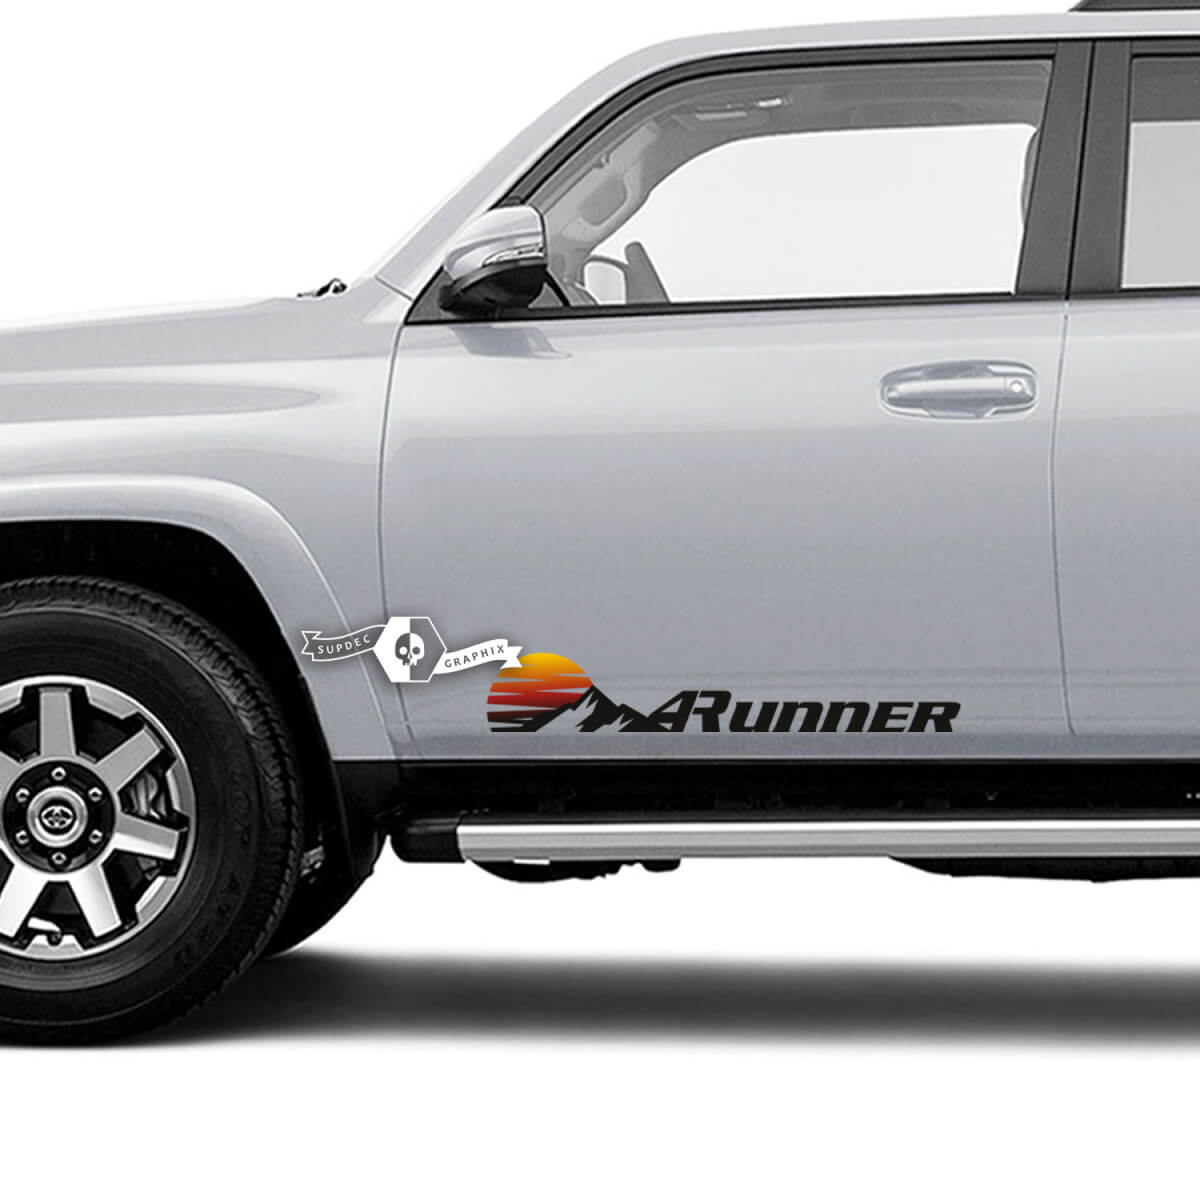 Pair of 4Runner Window Mountains SunSet Retro Side Door Vinyl Decals Stickers for Toyota 4Runner - Colored
